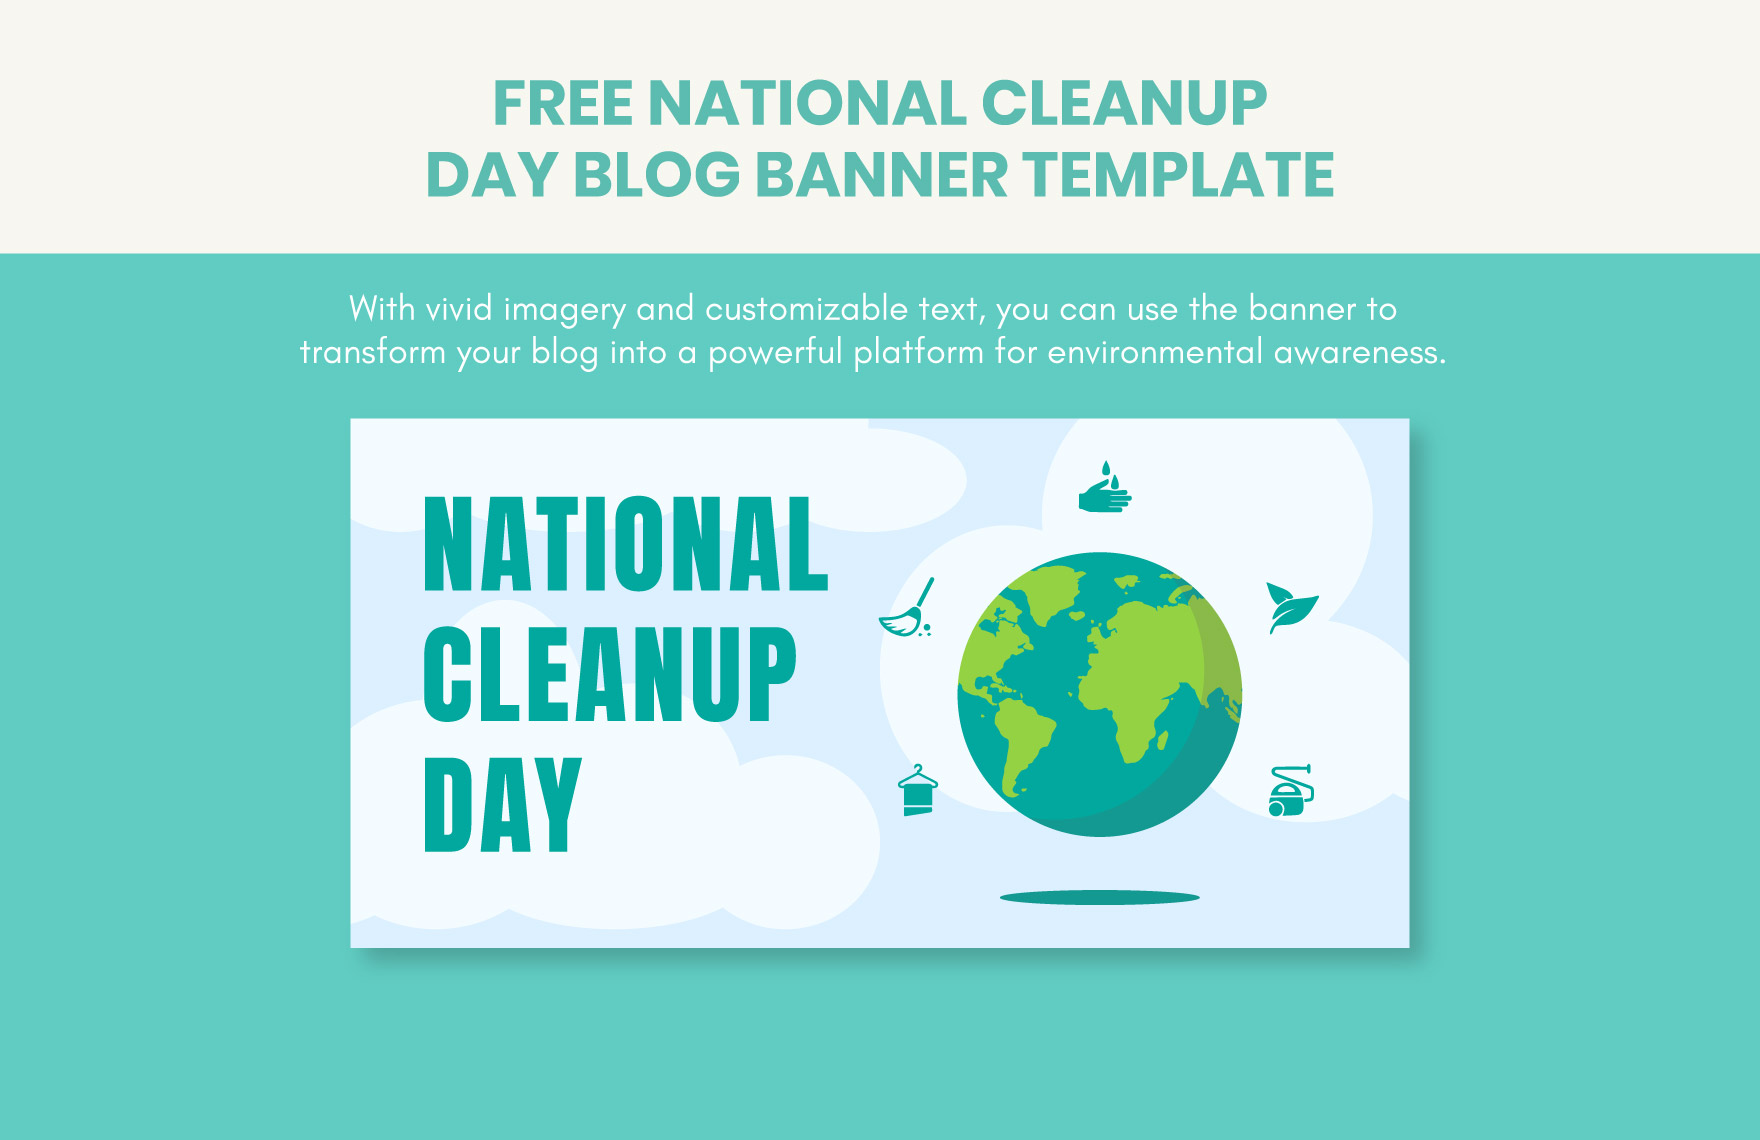 Free National CleanUp Day Blog Banner Template in Illustrator, PSD, PNG